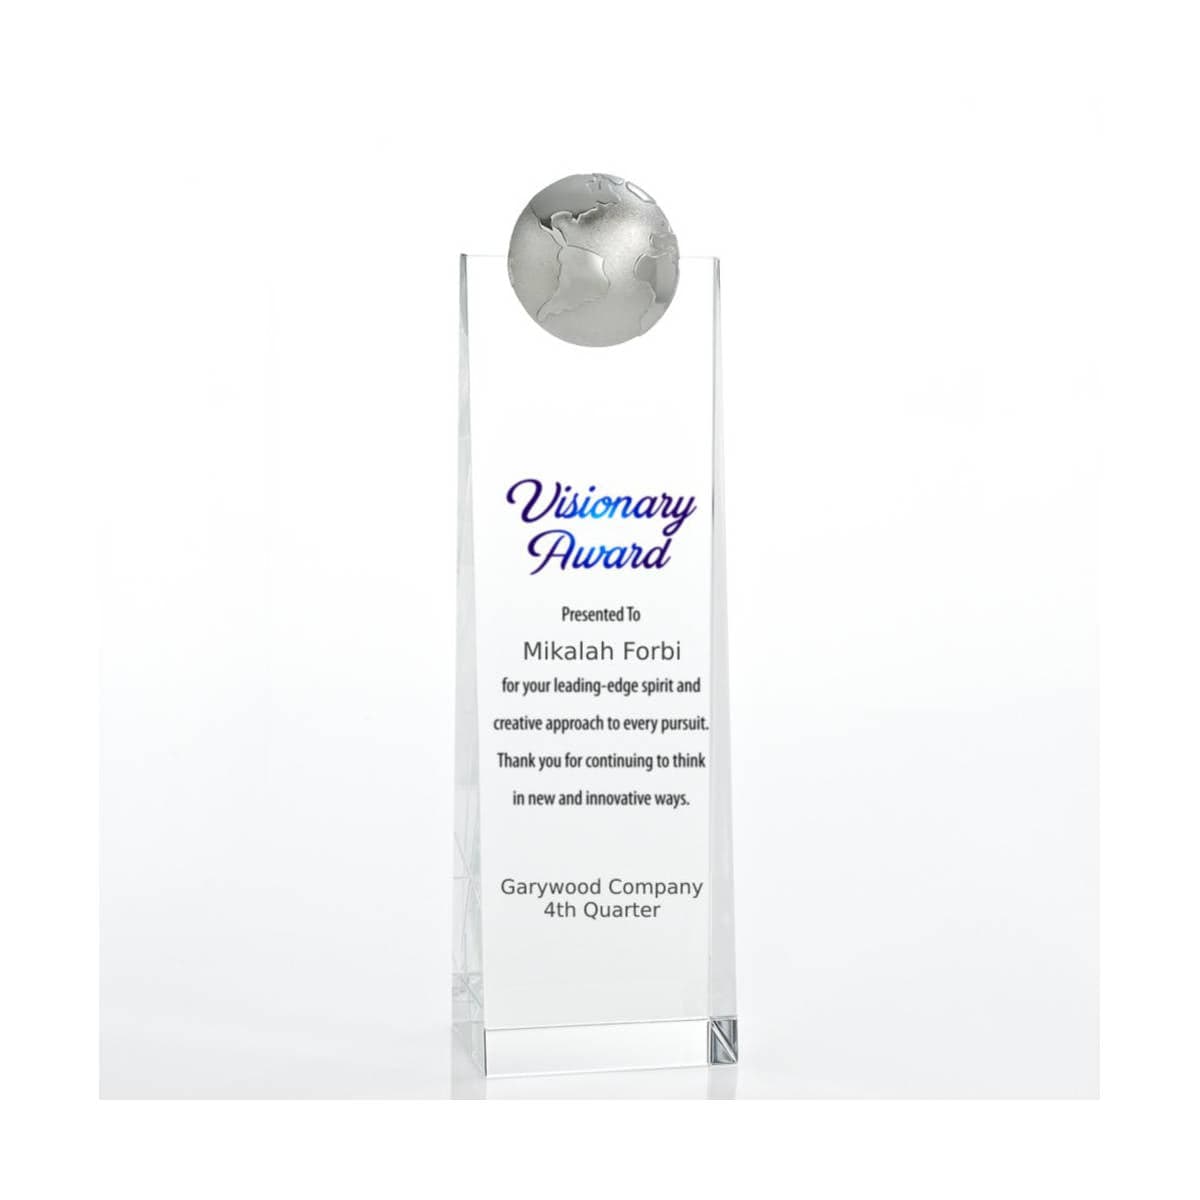 Limitless Collection: Crystalline Tower Trophies - Globe